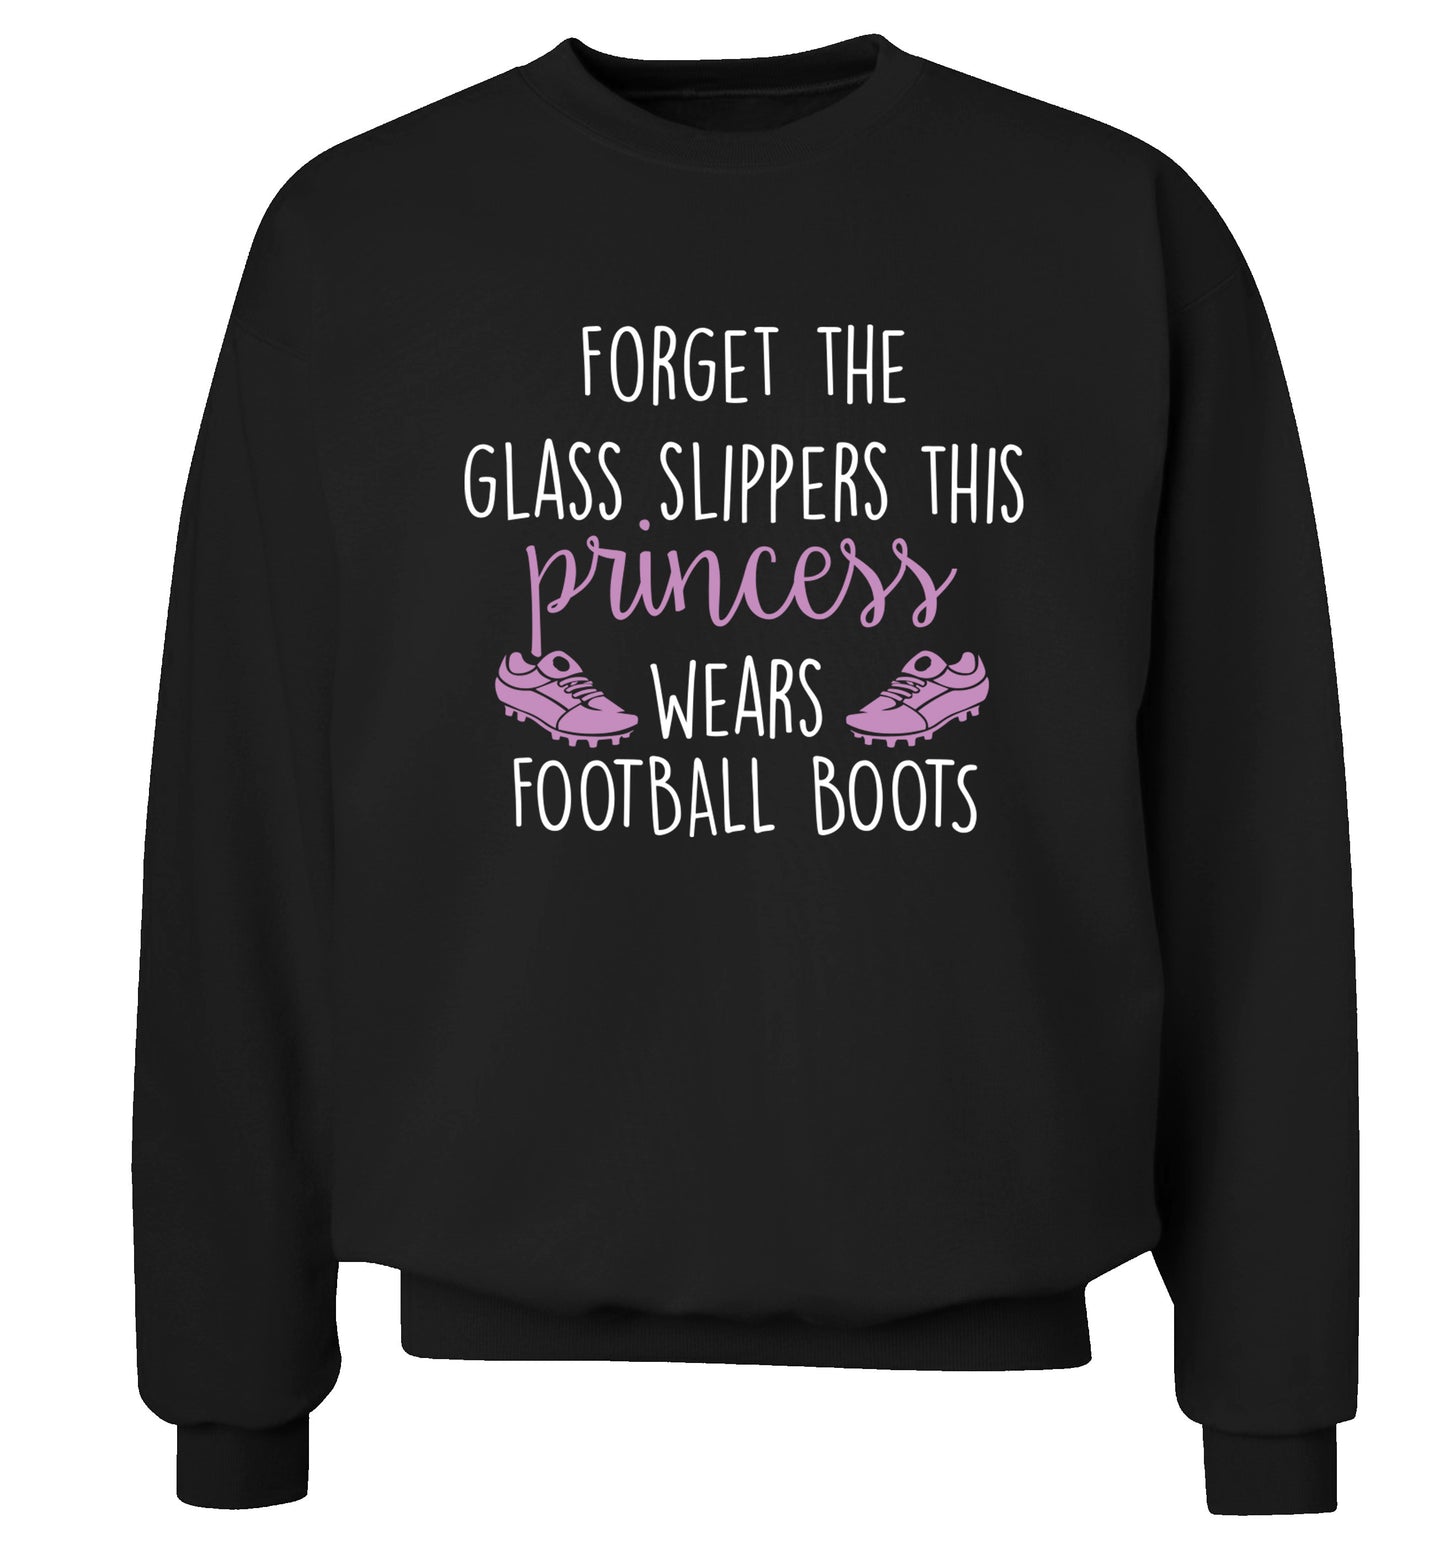 Forget the glass slippers this princess wears football boots Adult's unisex black Sweater 2XL